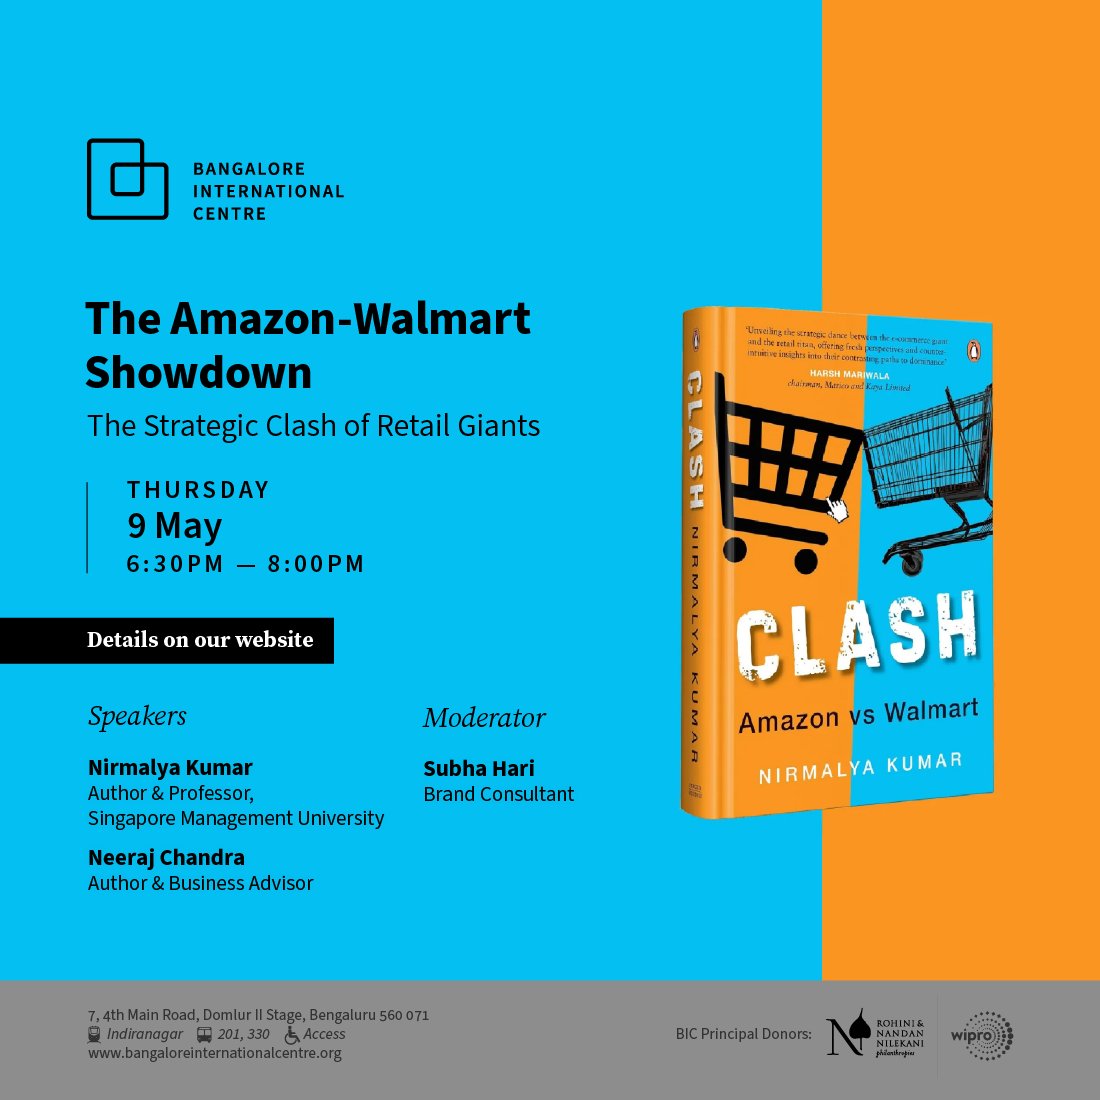 If you're in Bangalore this thursday, here's a chance to be a part of an amazing conversation around the strategic clash of retail giants with @ProfKumar!!